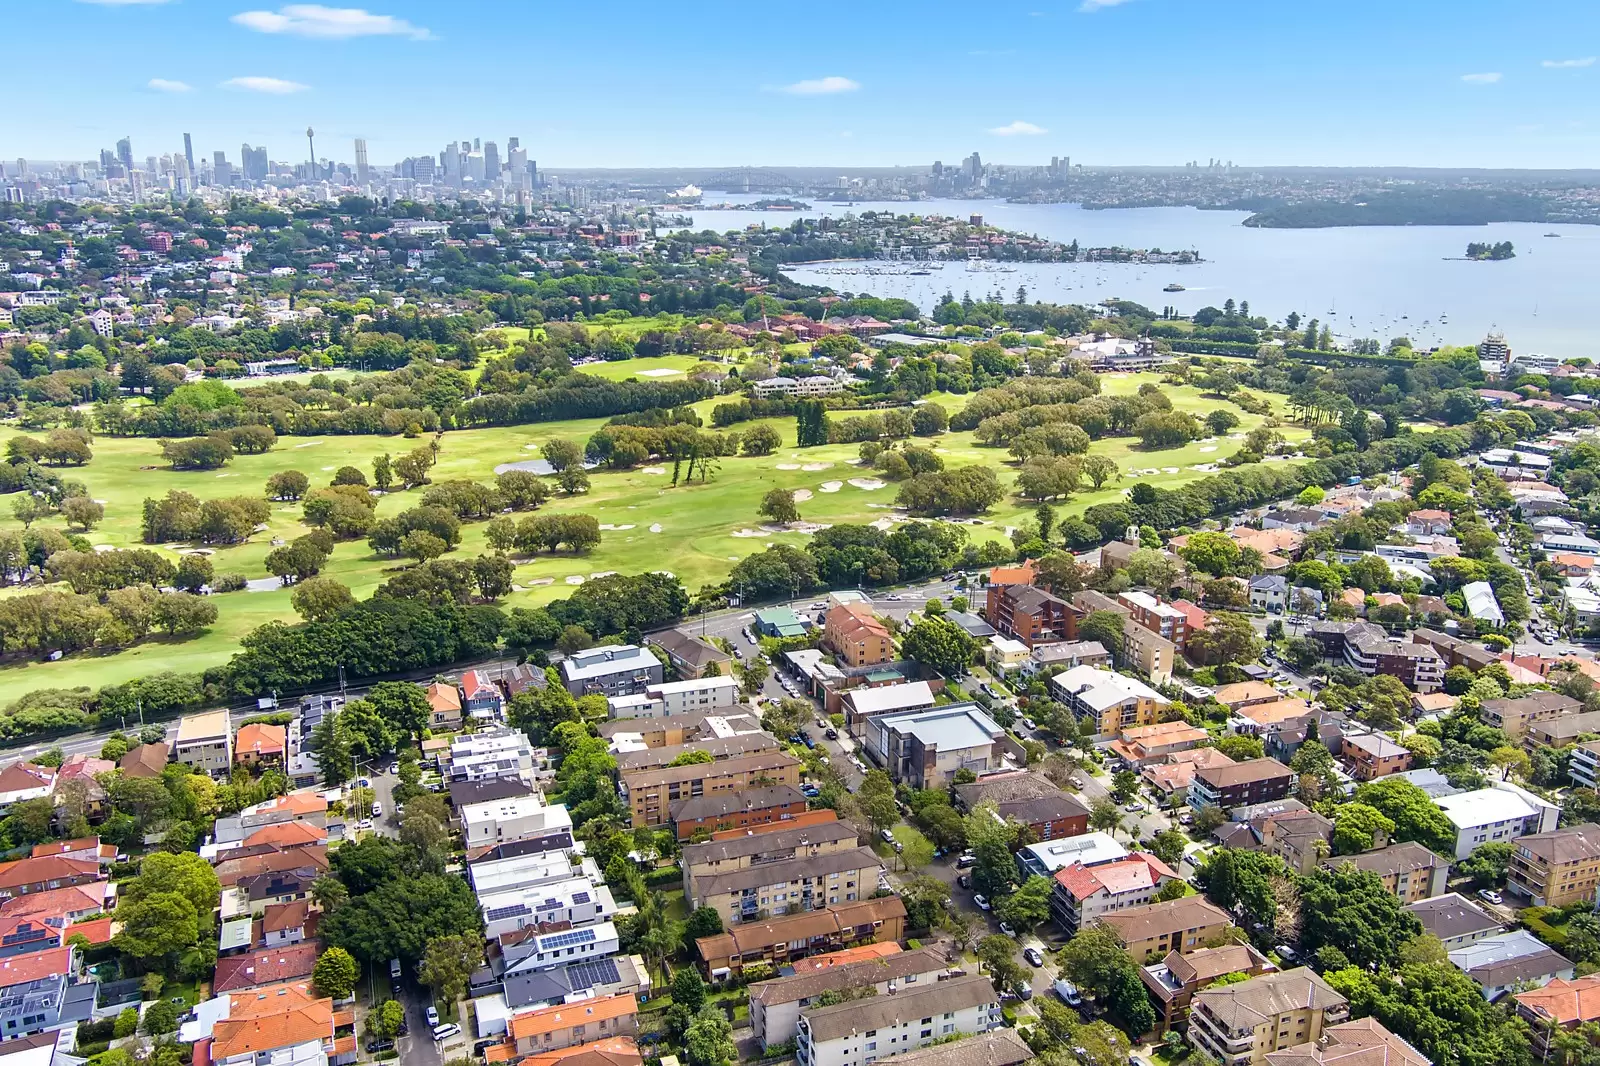 Photo #24: 23 William Street, Rose Bay - Sold by Sydney Sotheby's International Realty